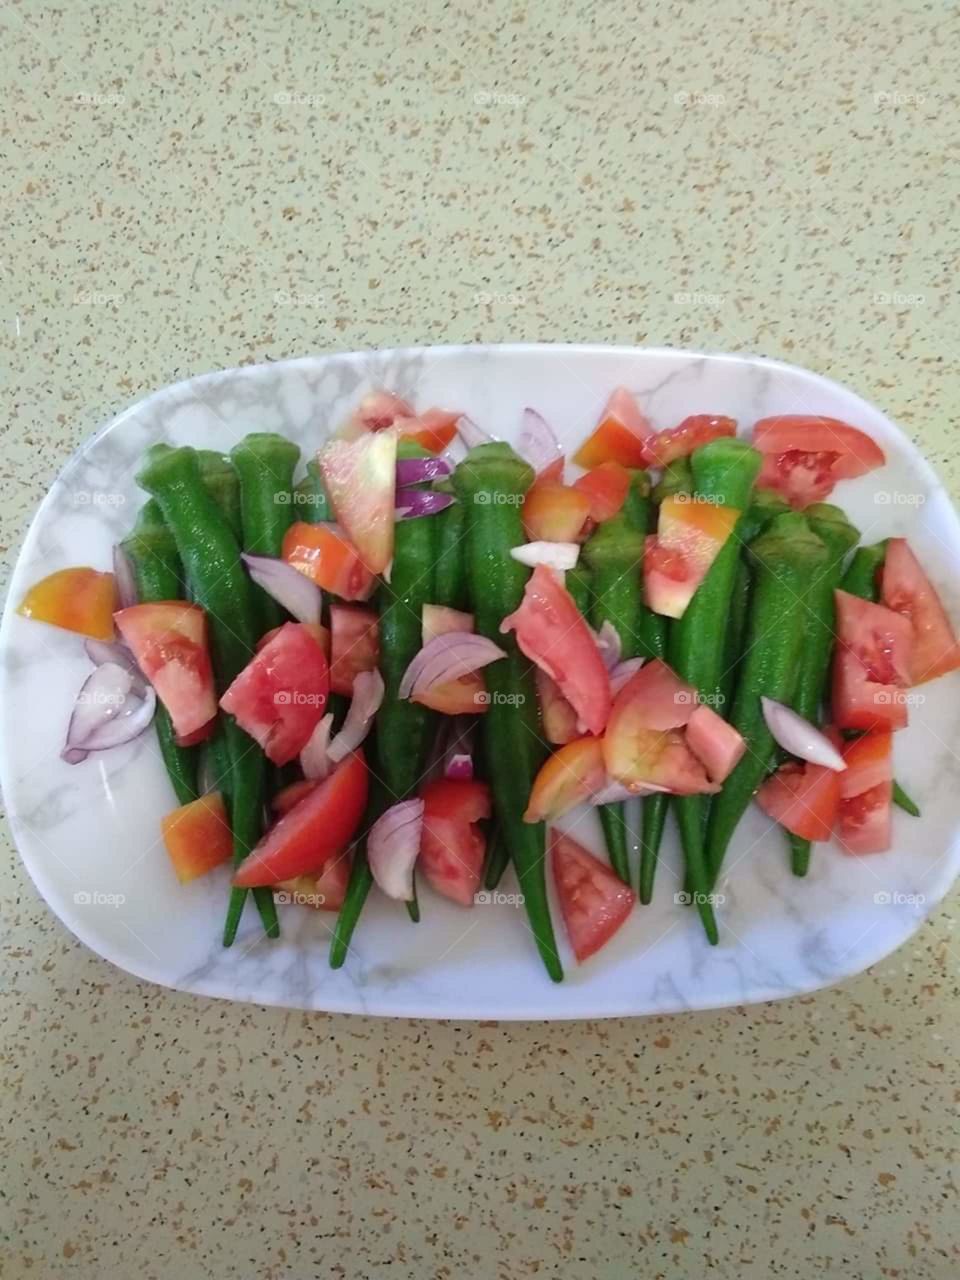 okra salad in to tomatoes